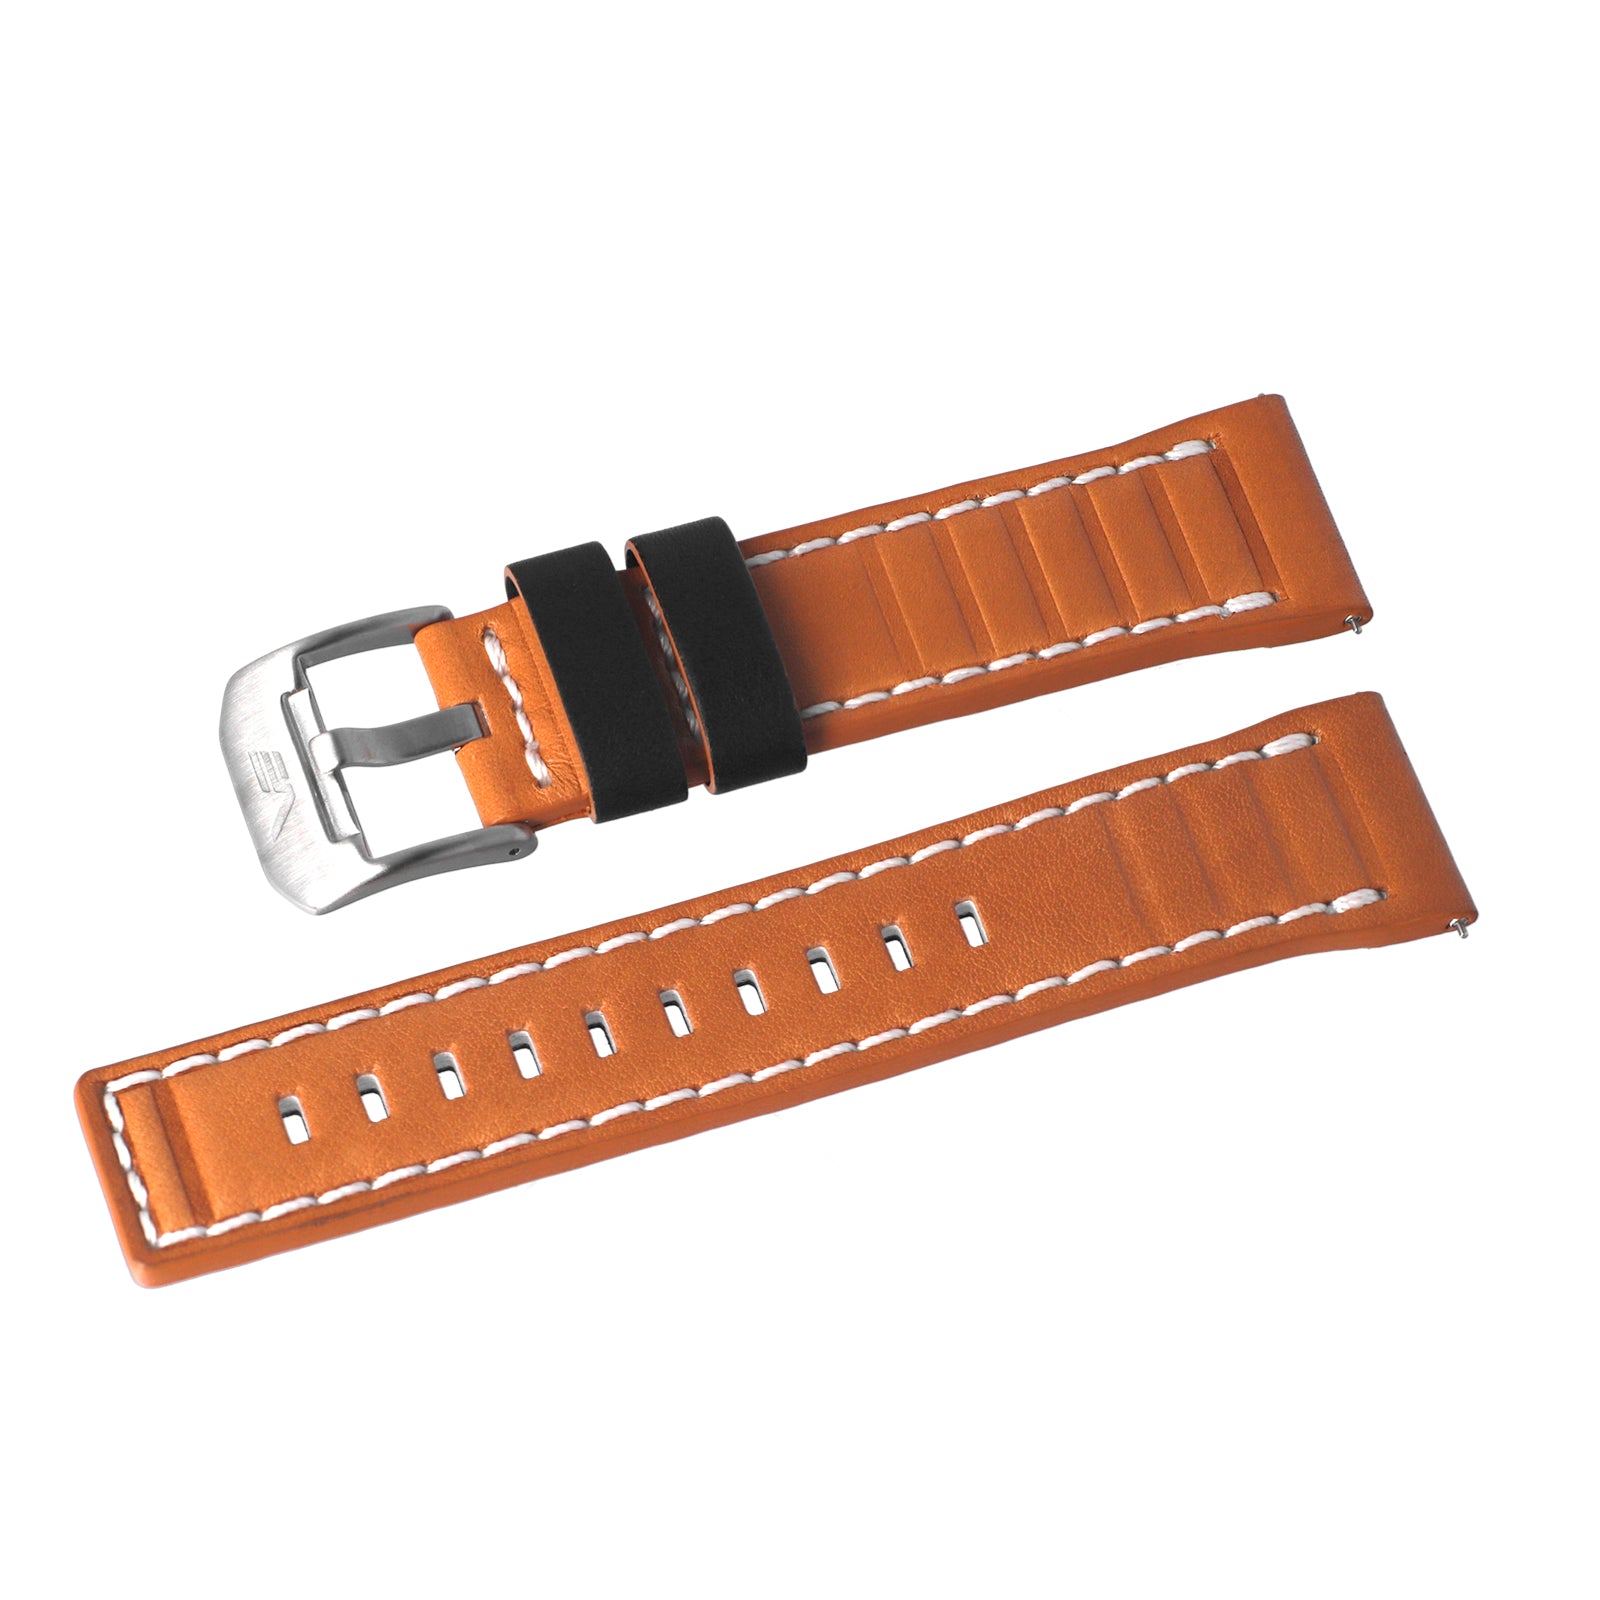 SYSTEMA PERIODICUM BROWN & WHITE LEATHER STRAP - POLISHED BUCKLE